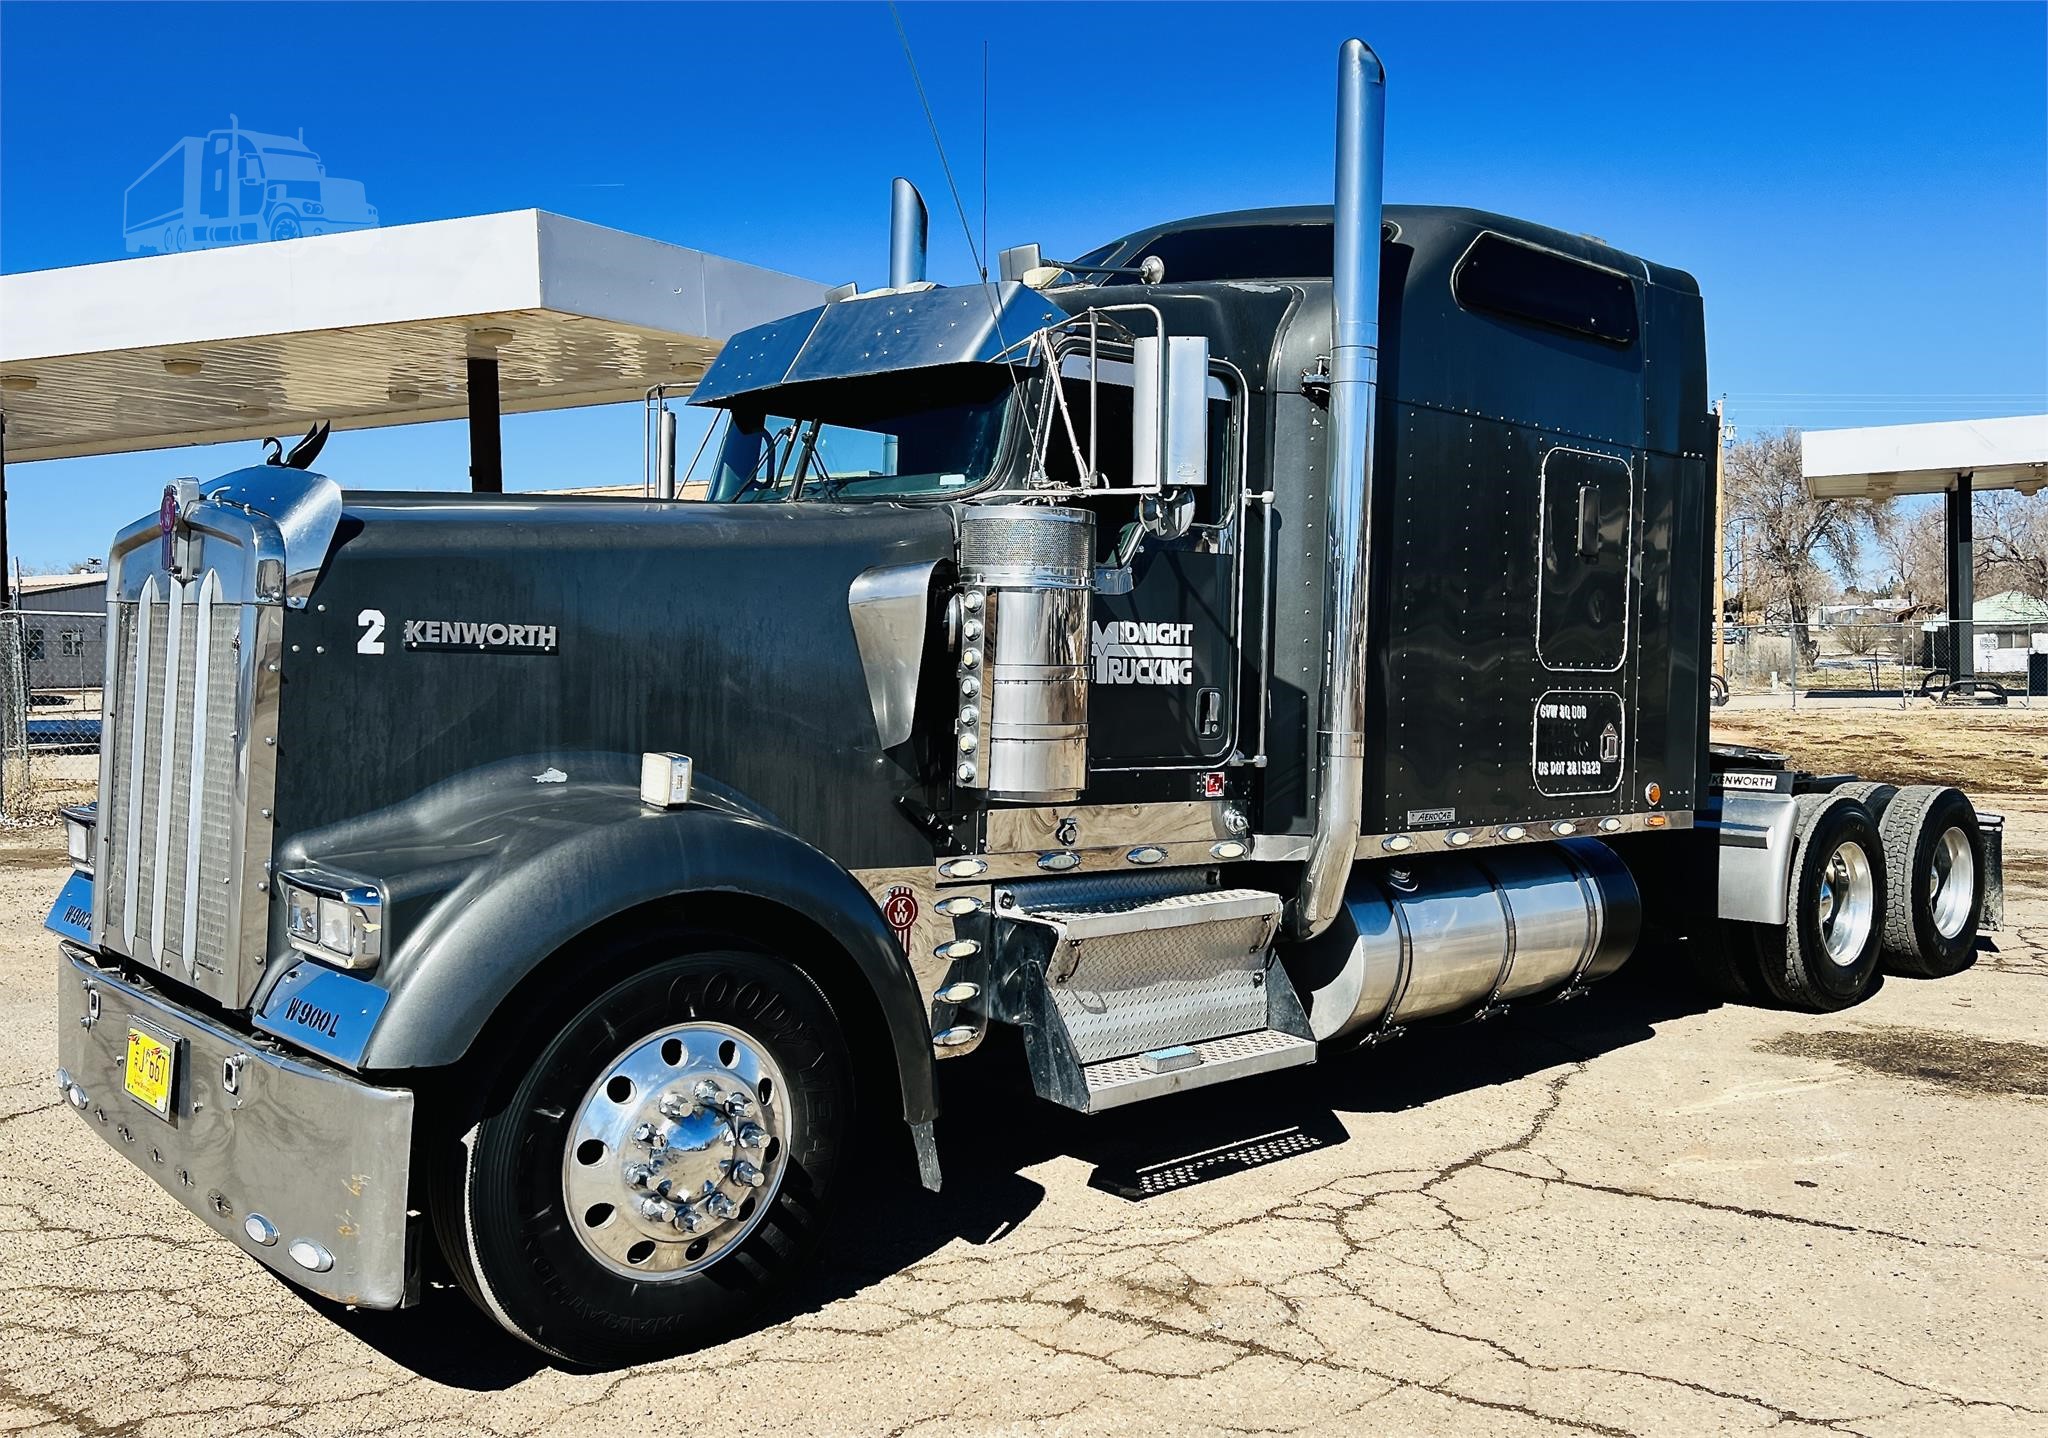 KENWORTH Trucks For Sale In California - 300 Listings - TruckPaper.com -  Page 1 of 12